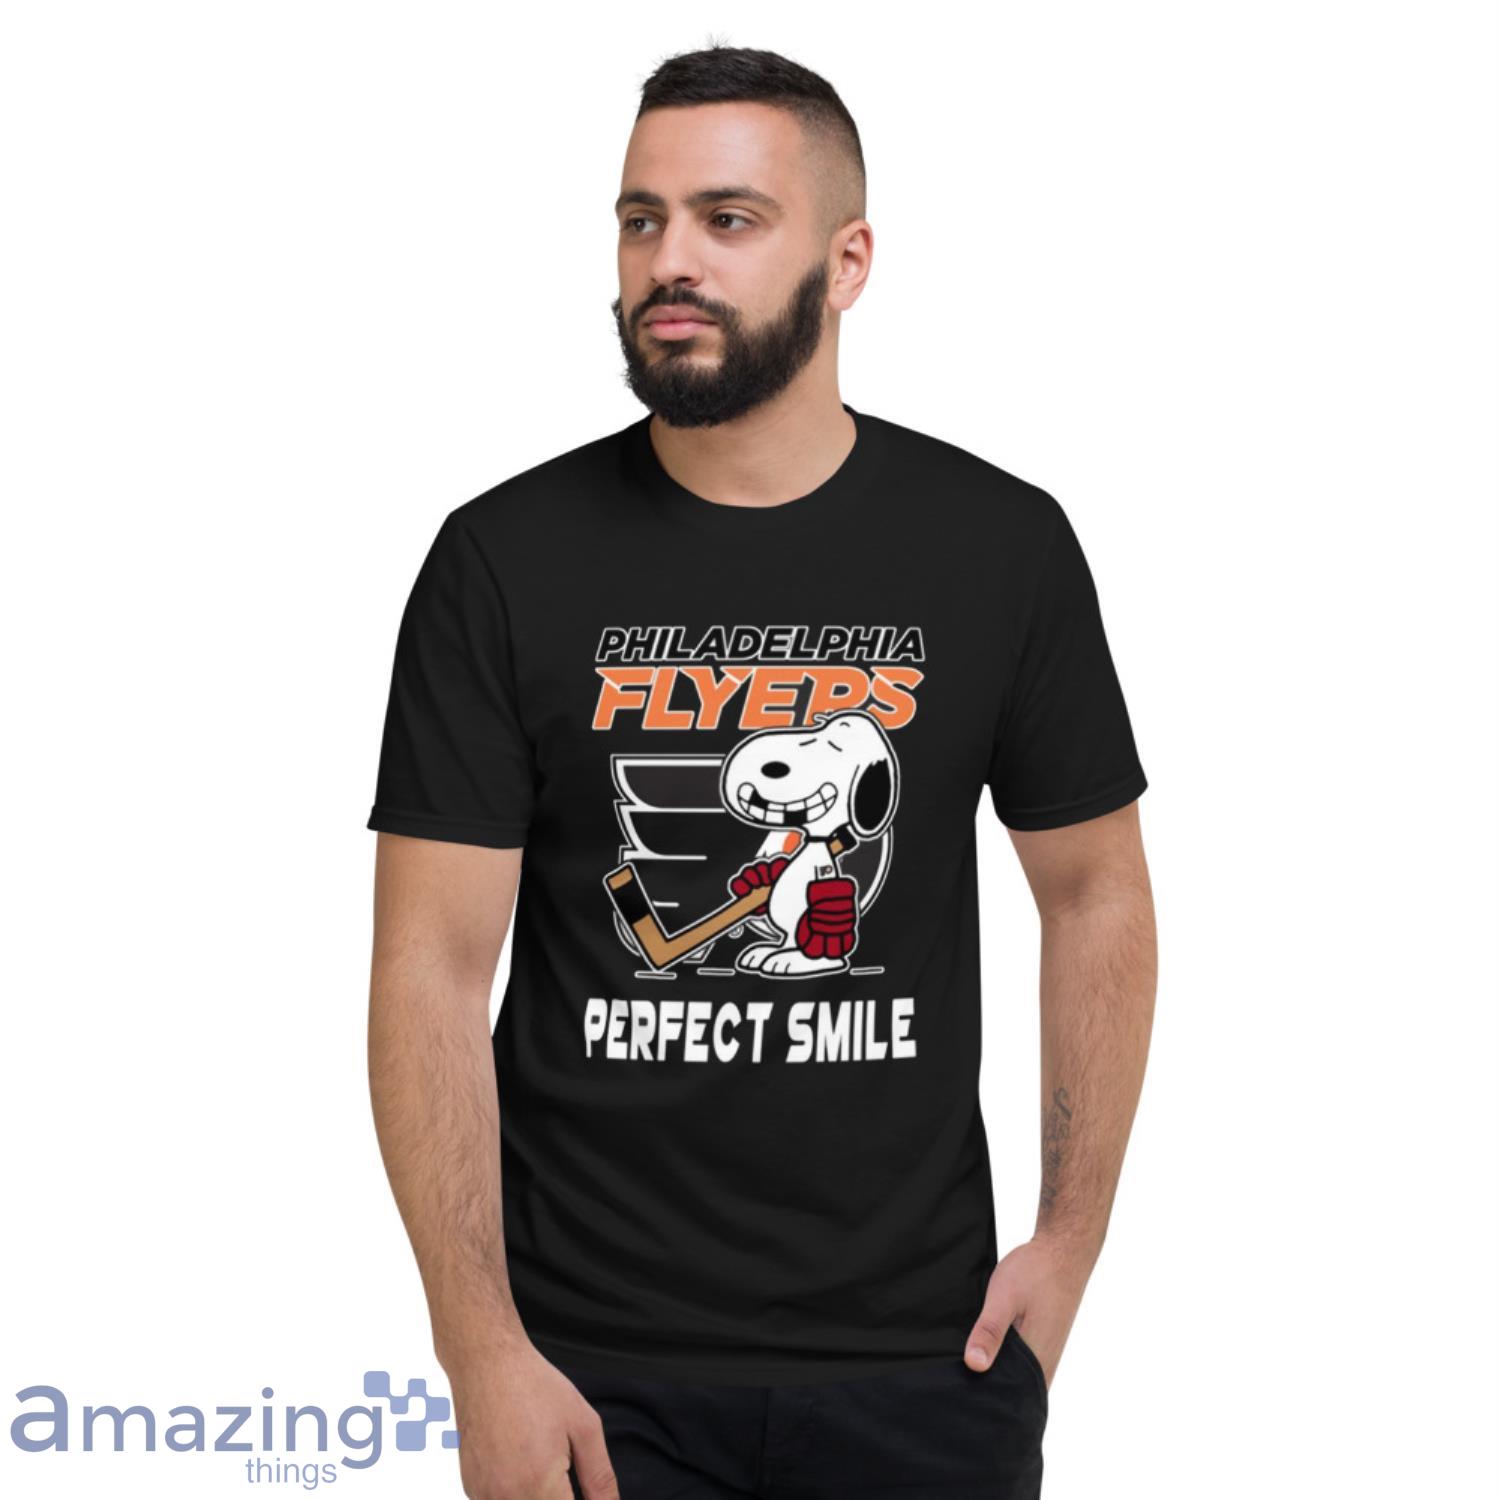 Philadelphia Flyers Youth Allover Print Long Sleeve T-Shirt and